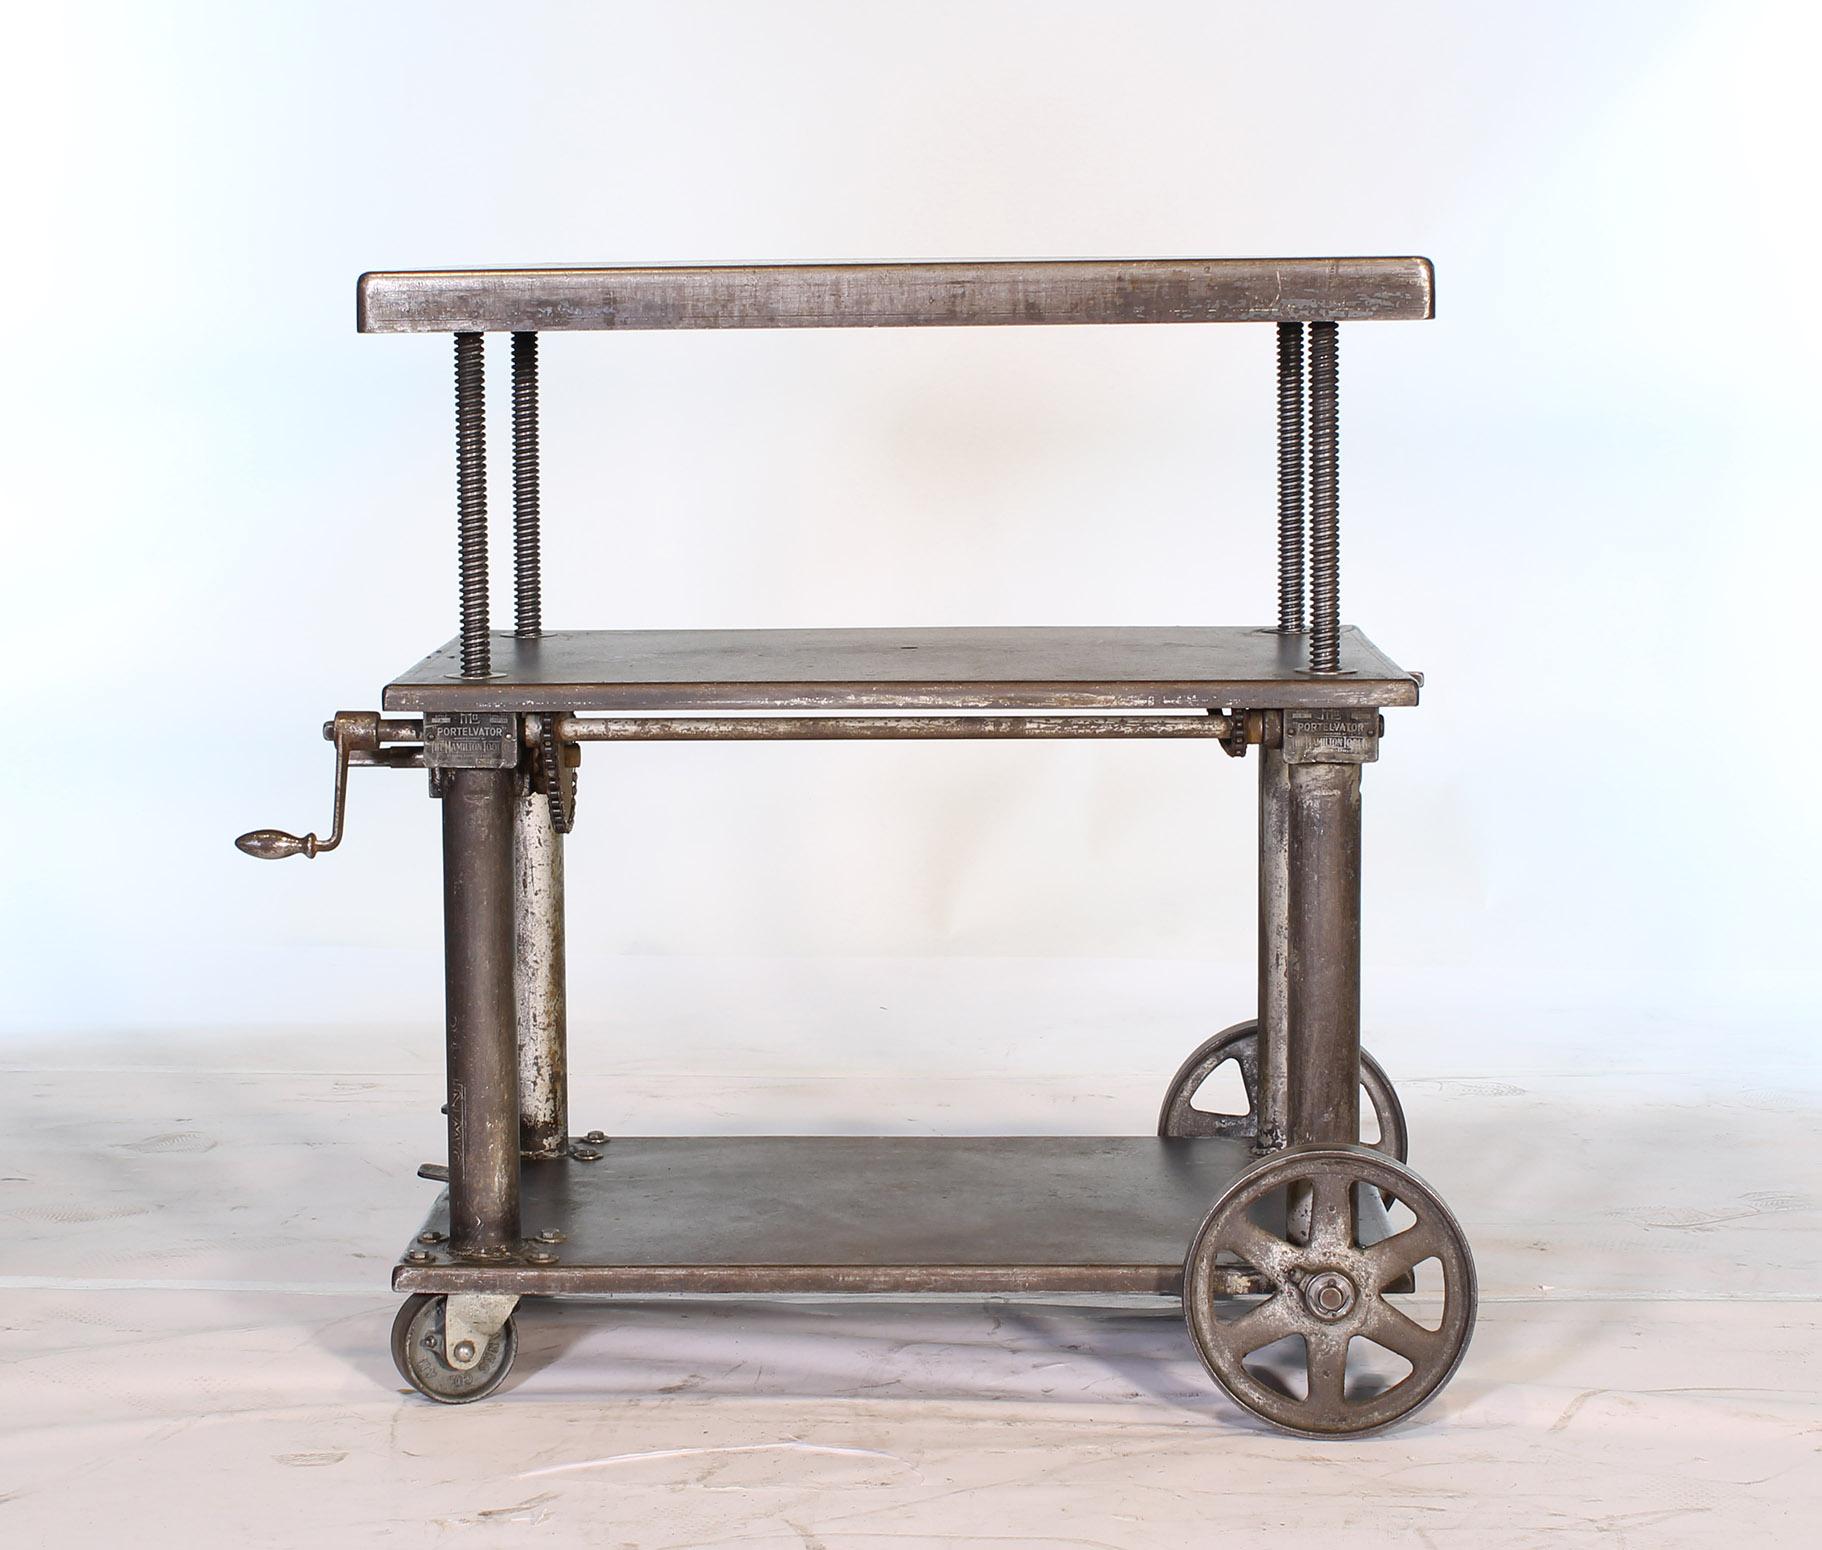 Original vintage Industrial adjustable metal, steel rolling three tier lift bar cart / table with cast iron casters / wheels. Measure: Top is adjustable in height from 25 1/4